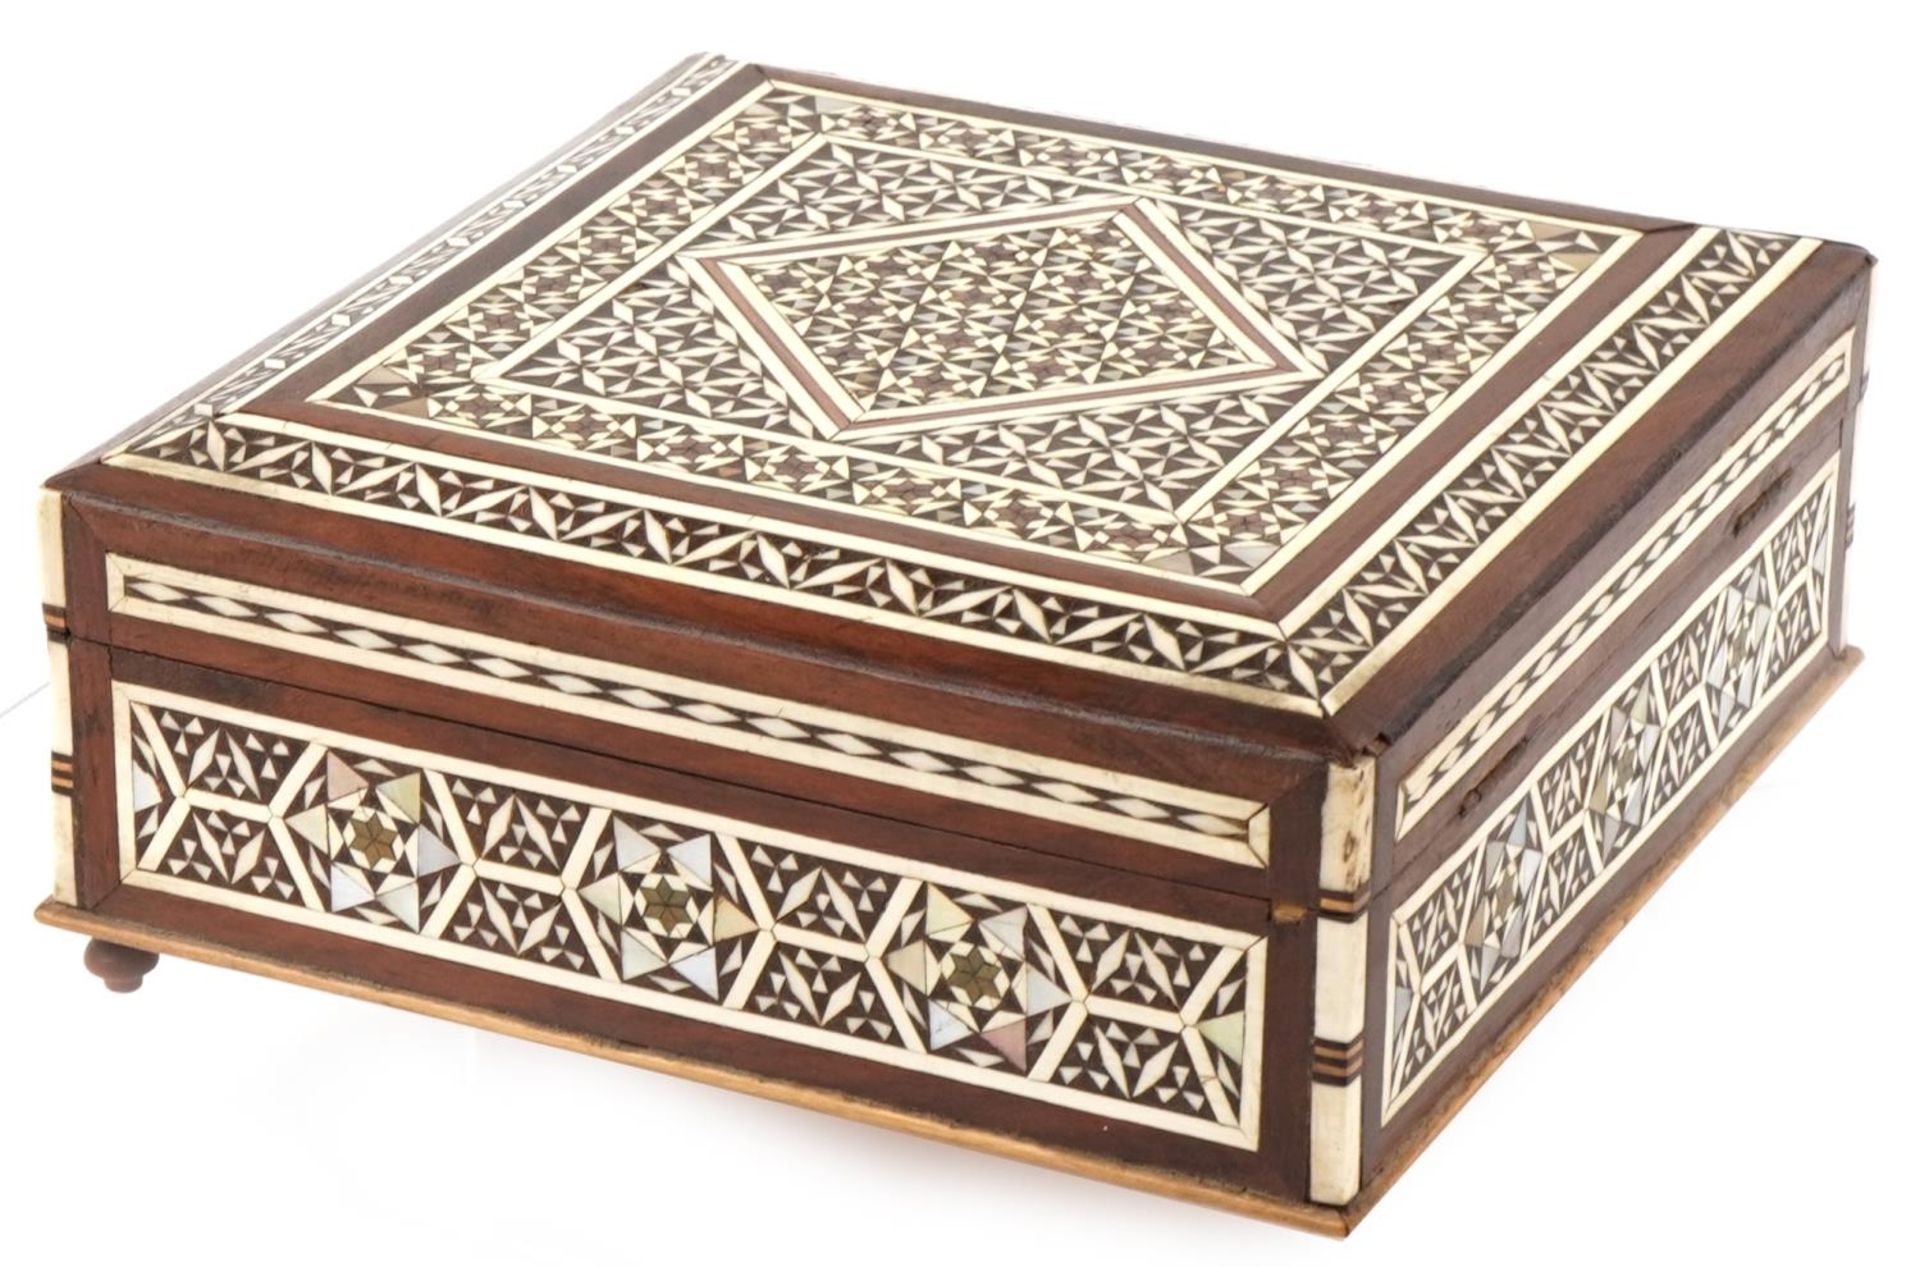 Moorish style Vizagapatam design musical jewellery box with bone and mother of pearl inlay, 8.5cm - Image 5 of 6